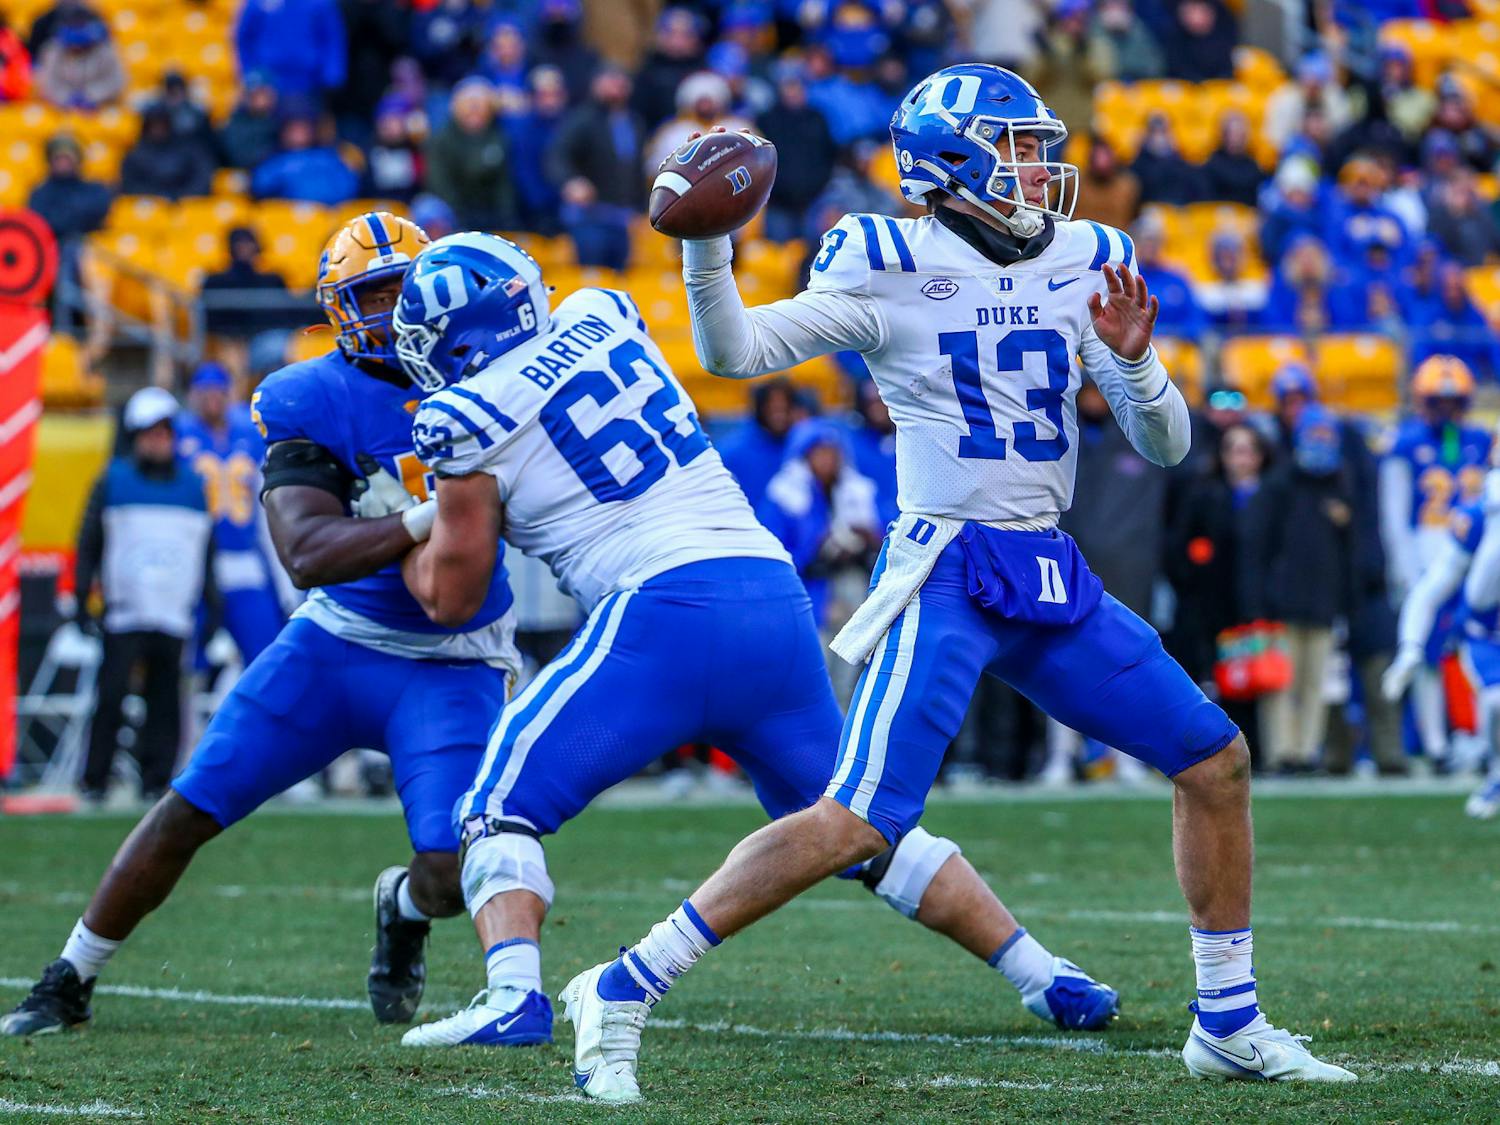 Senior Graham Barton (left, 62) will lead Duke's offensive line, which finished first in the league in sacks allowed.&nbsp;